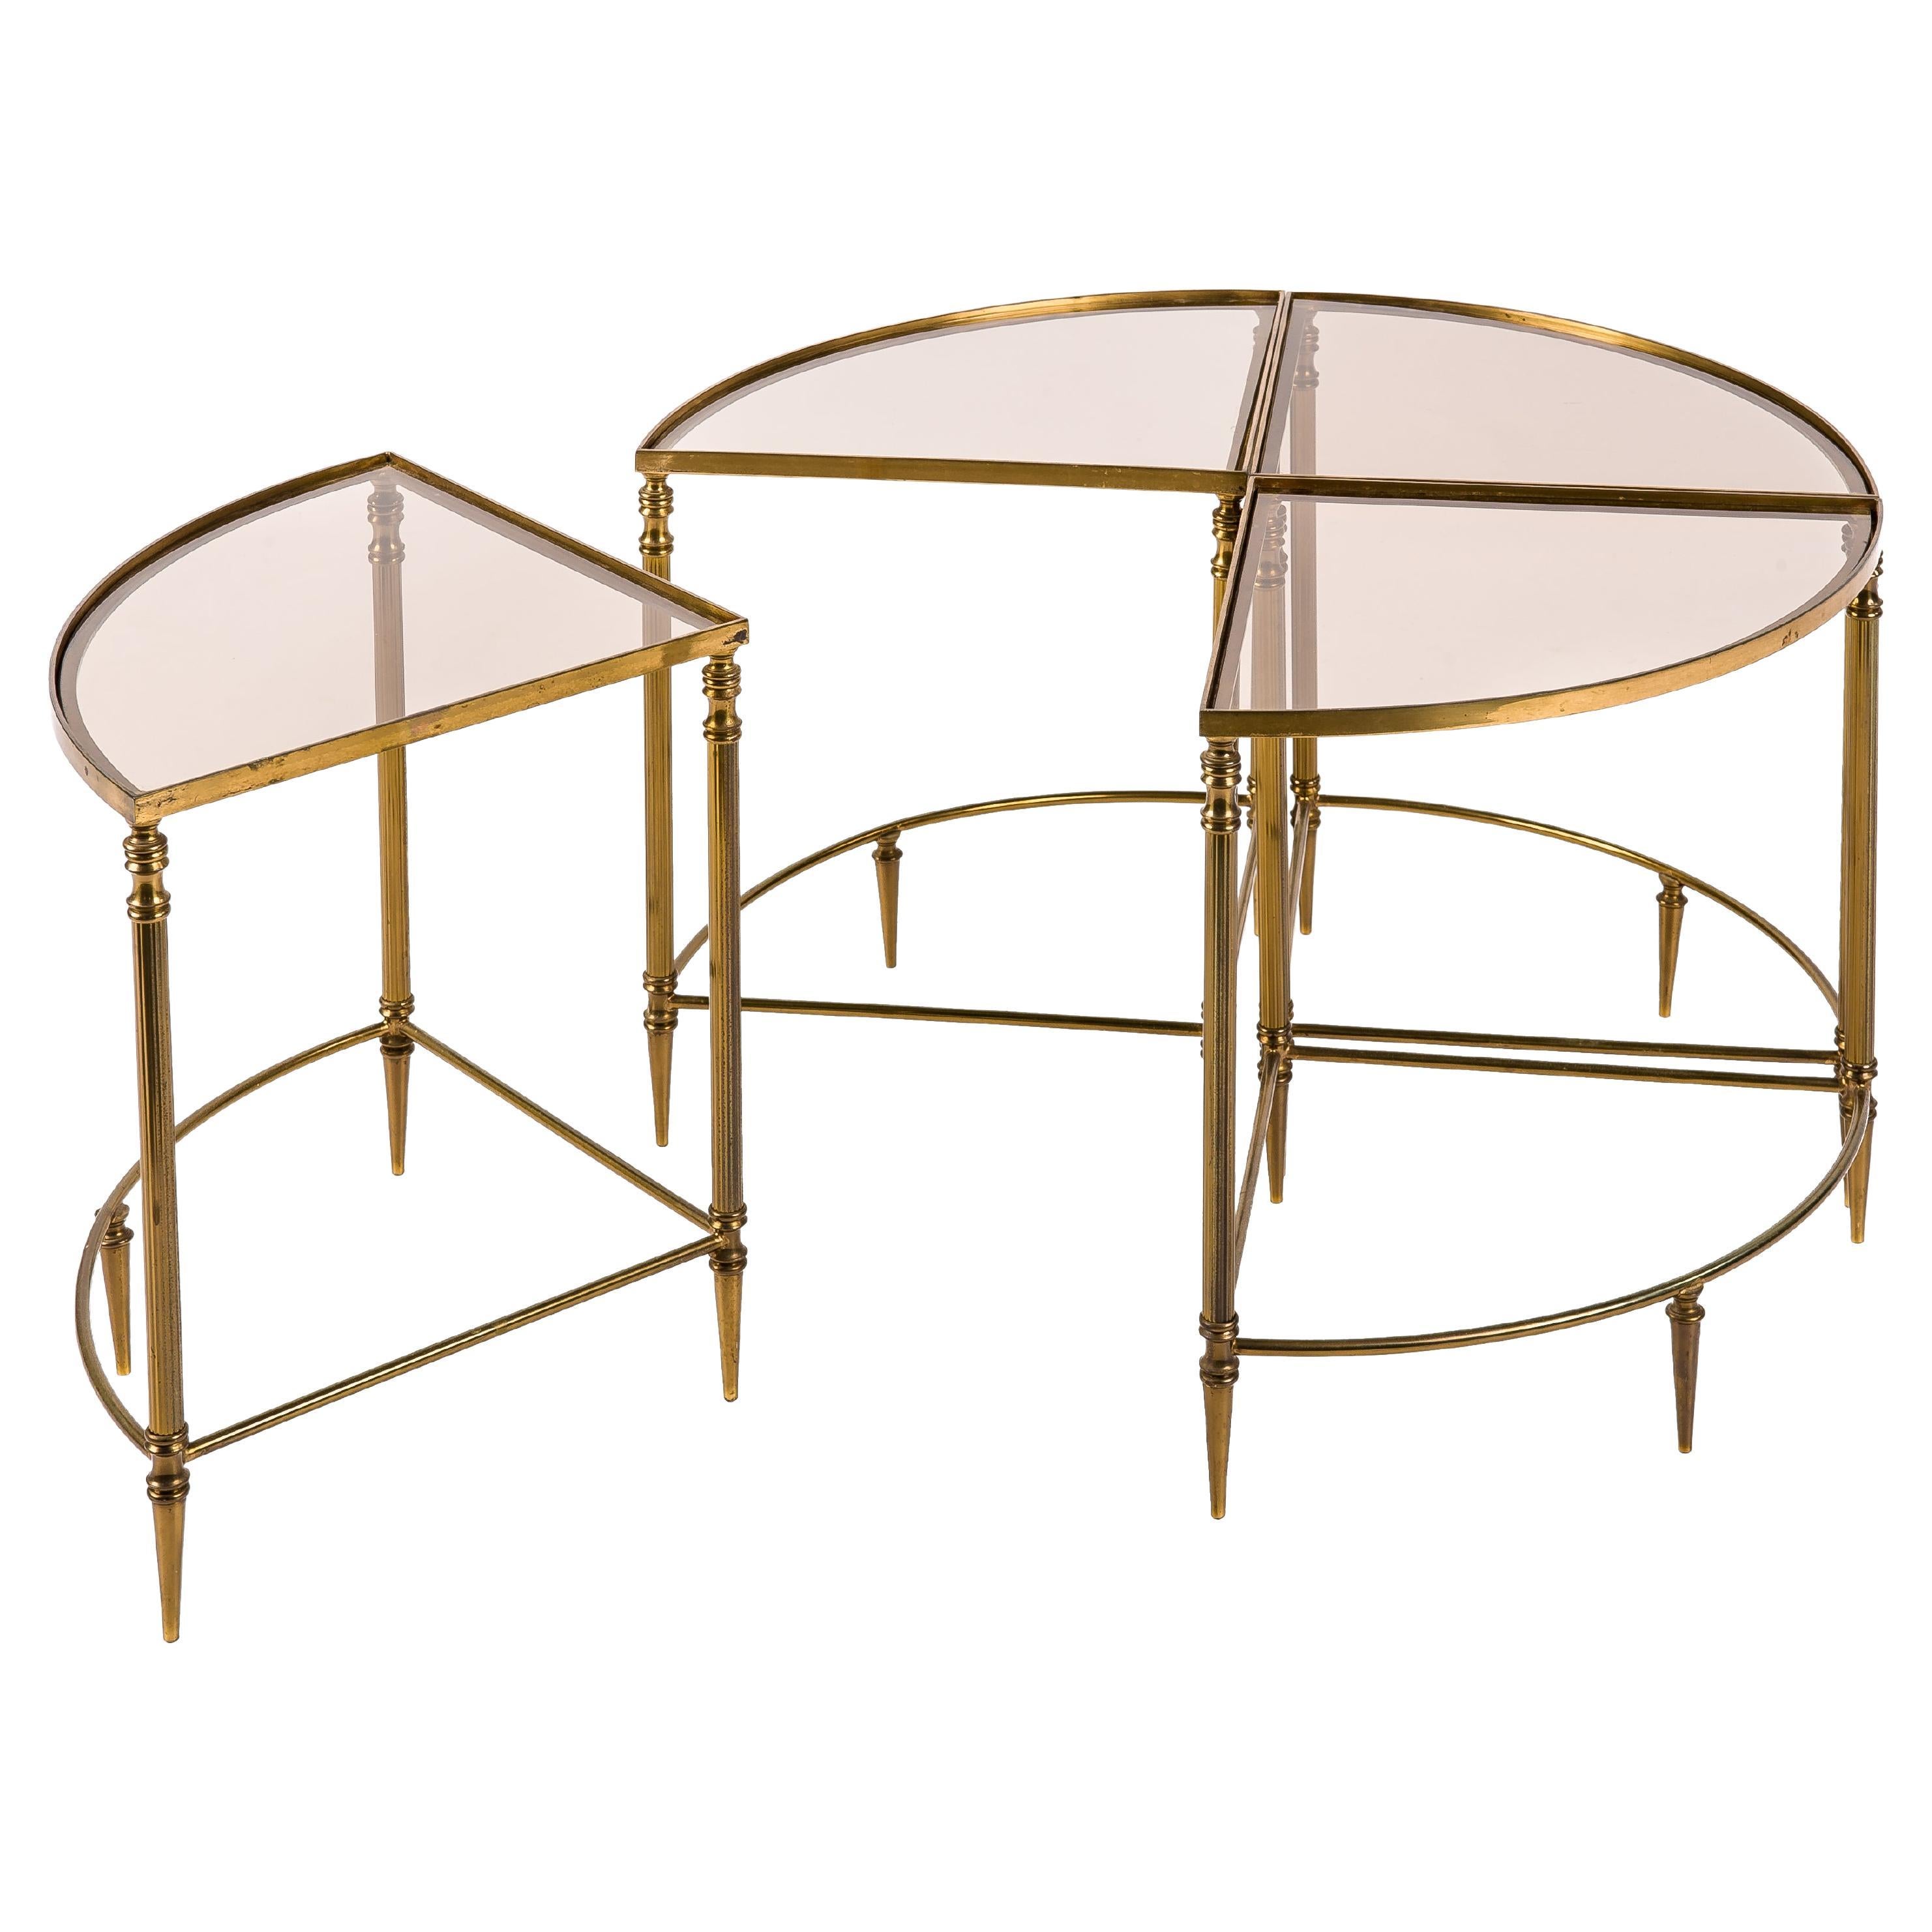 4 Pieces of French Brass Quarter Round Neo-Classical Tables by Maison Baguès For Sale